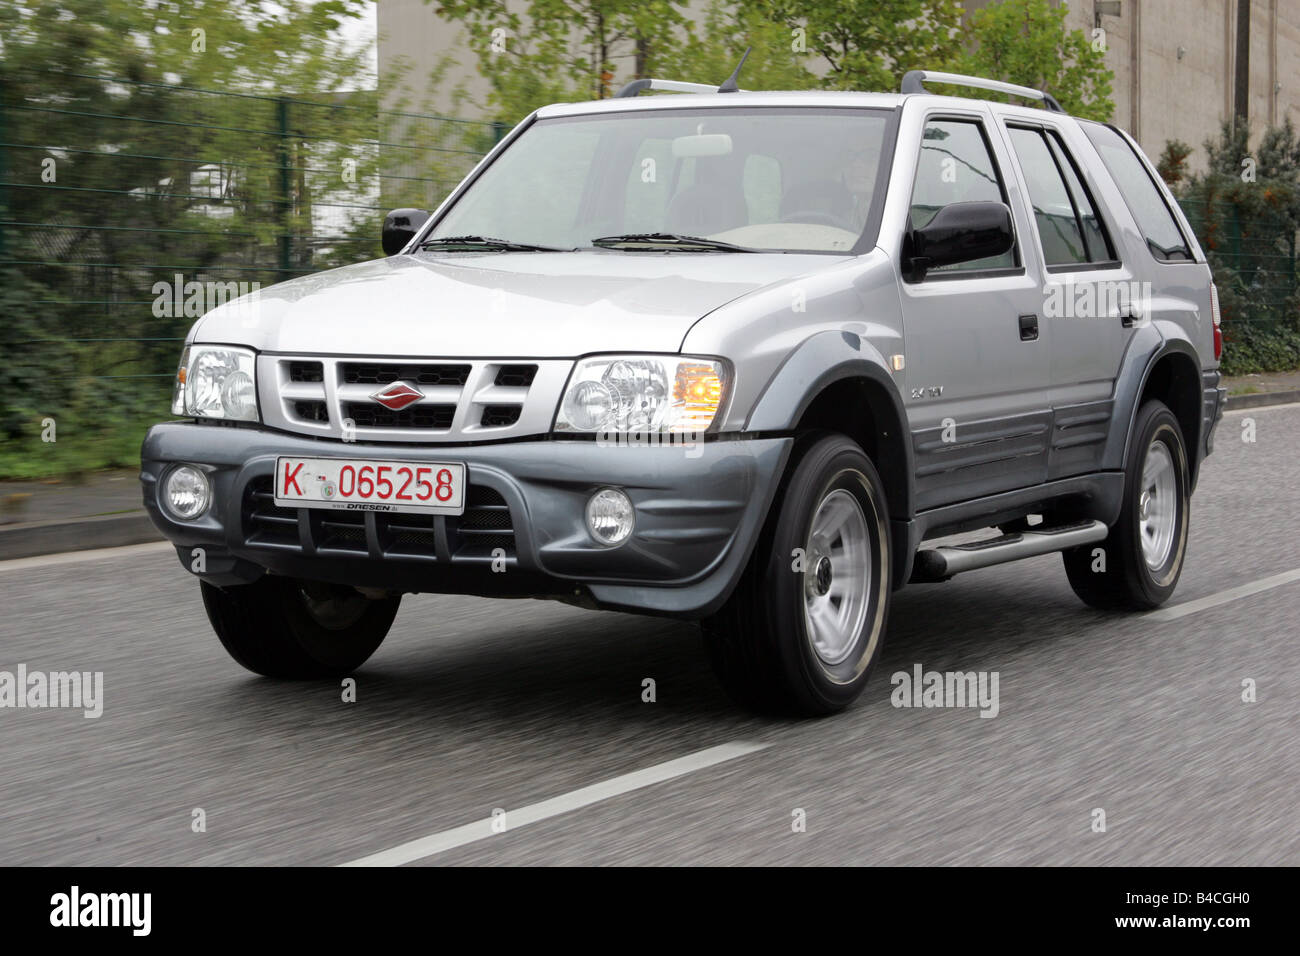 Car, Land breeze, cross country vehicle, model year 2005-, silver, driving, diagonal from the front, frontal view, City Stock Photo